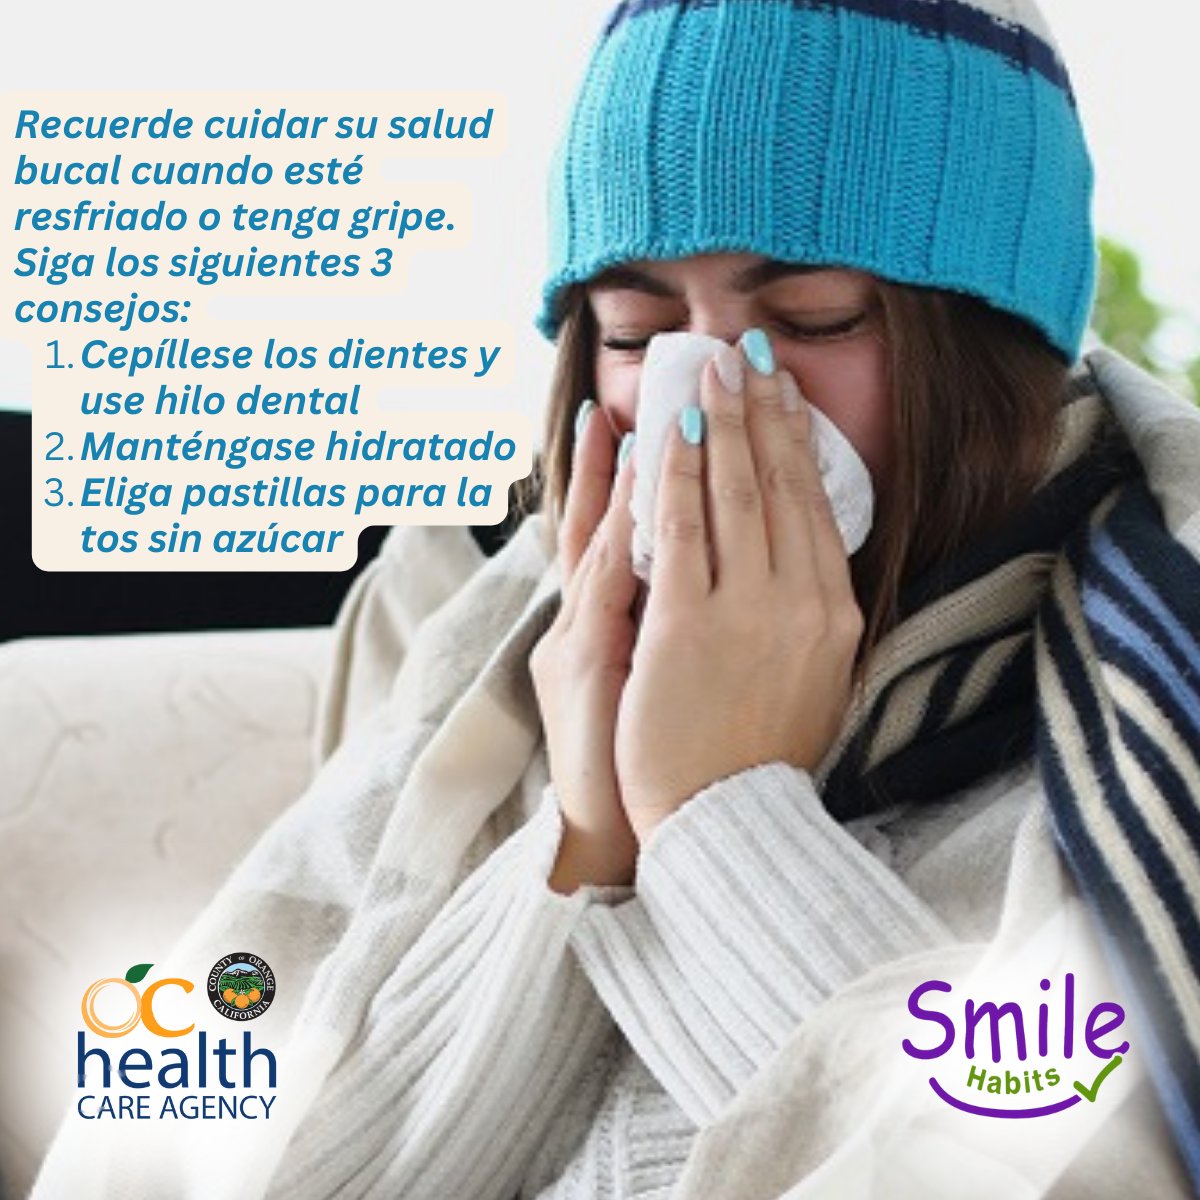 Taking care of your health and body when you have a cold or the flu is a top priority. Caring for your oral health is also important. Learn tips to maintain good oral health when feeling under the weather: ow.ly/1CLG50QjORn Spanish: ow.ly/TH5C50QjORm